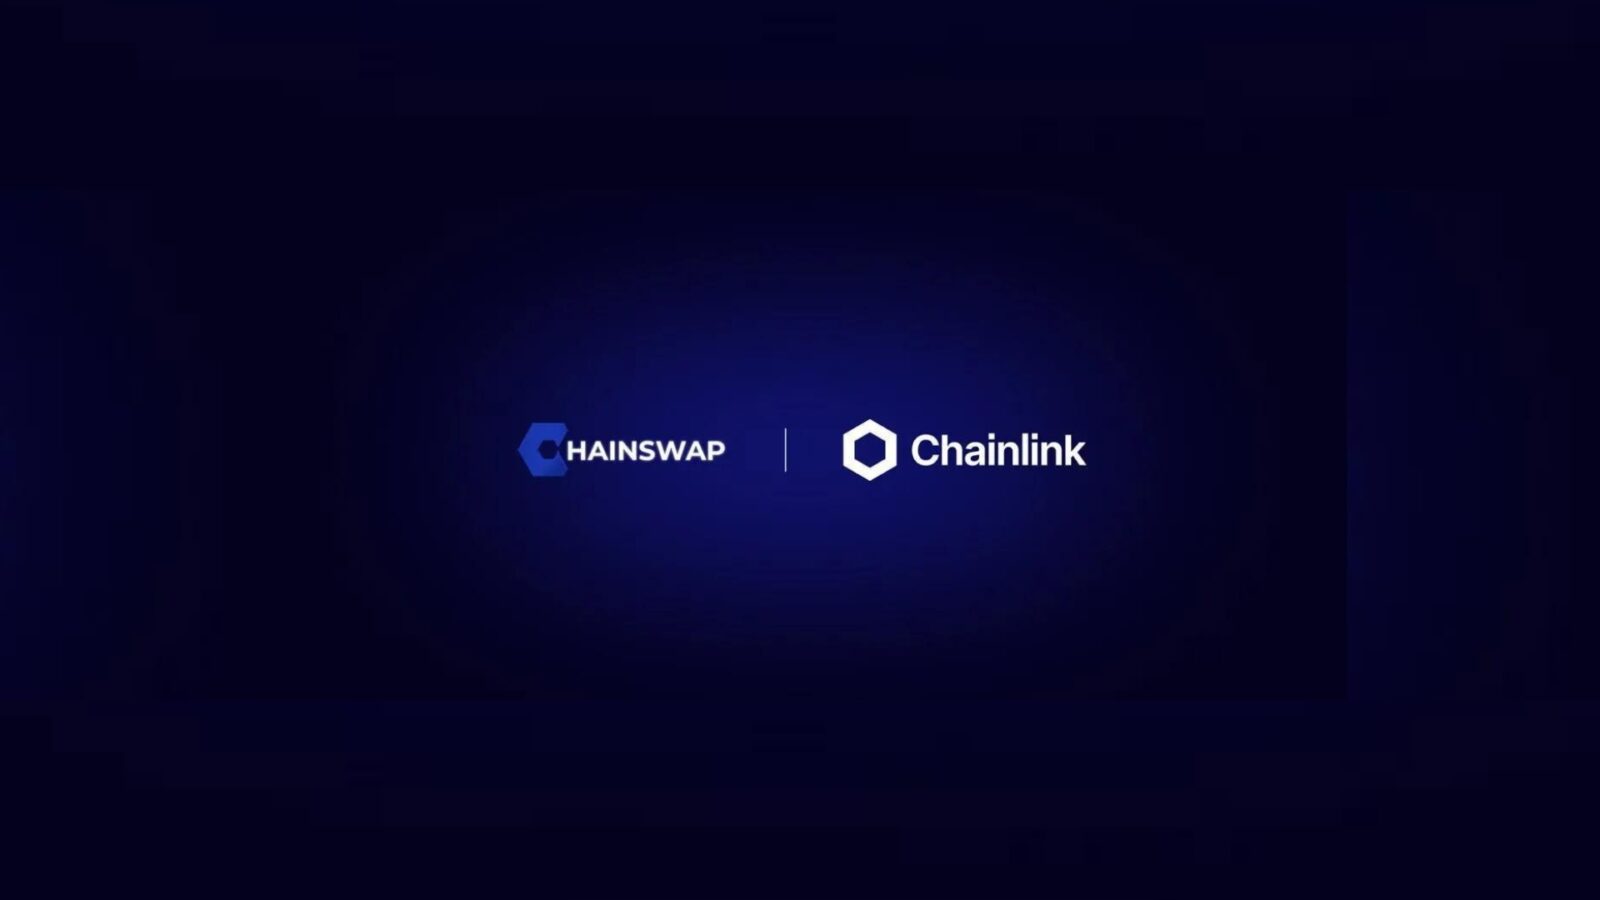 ChainSwap Enhances Security and Speed with Chainlink CCIP Integration